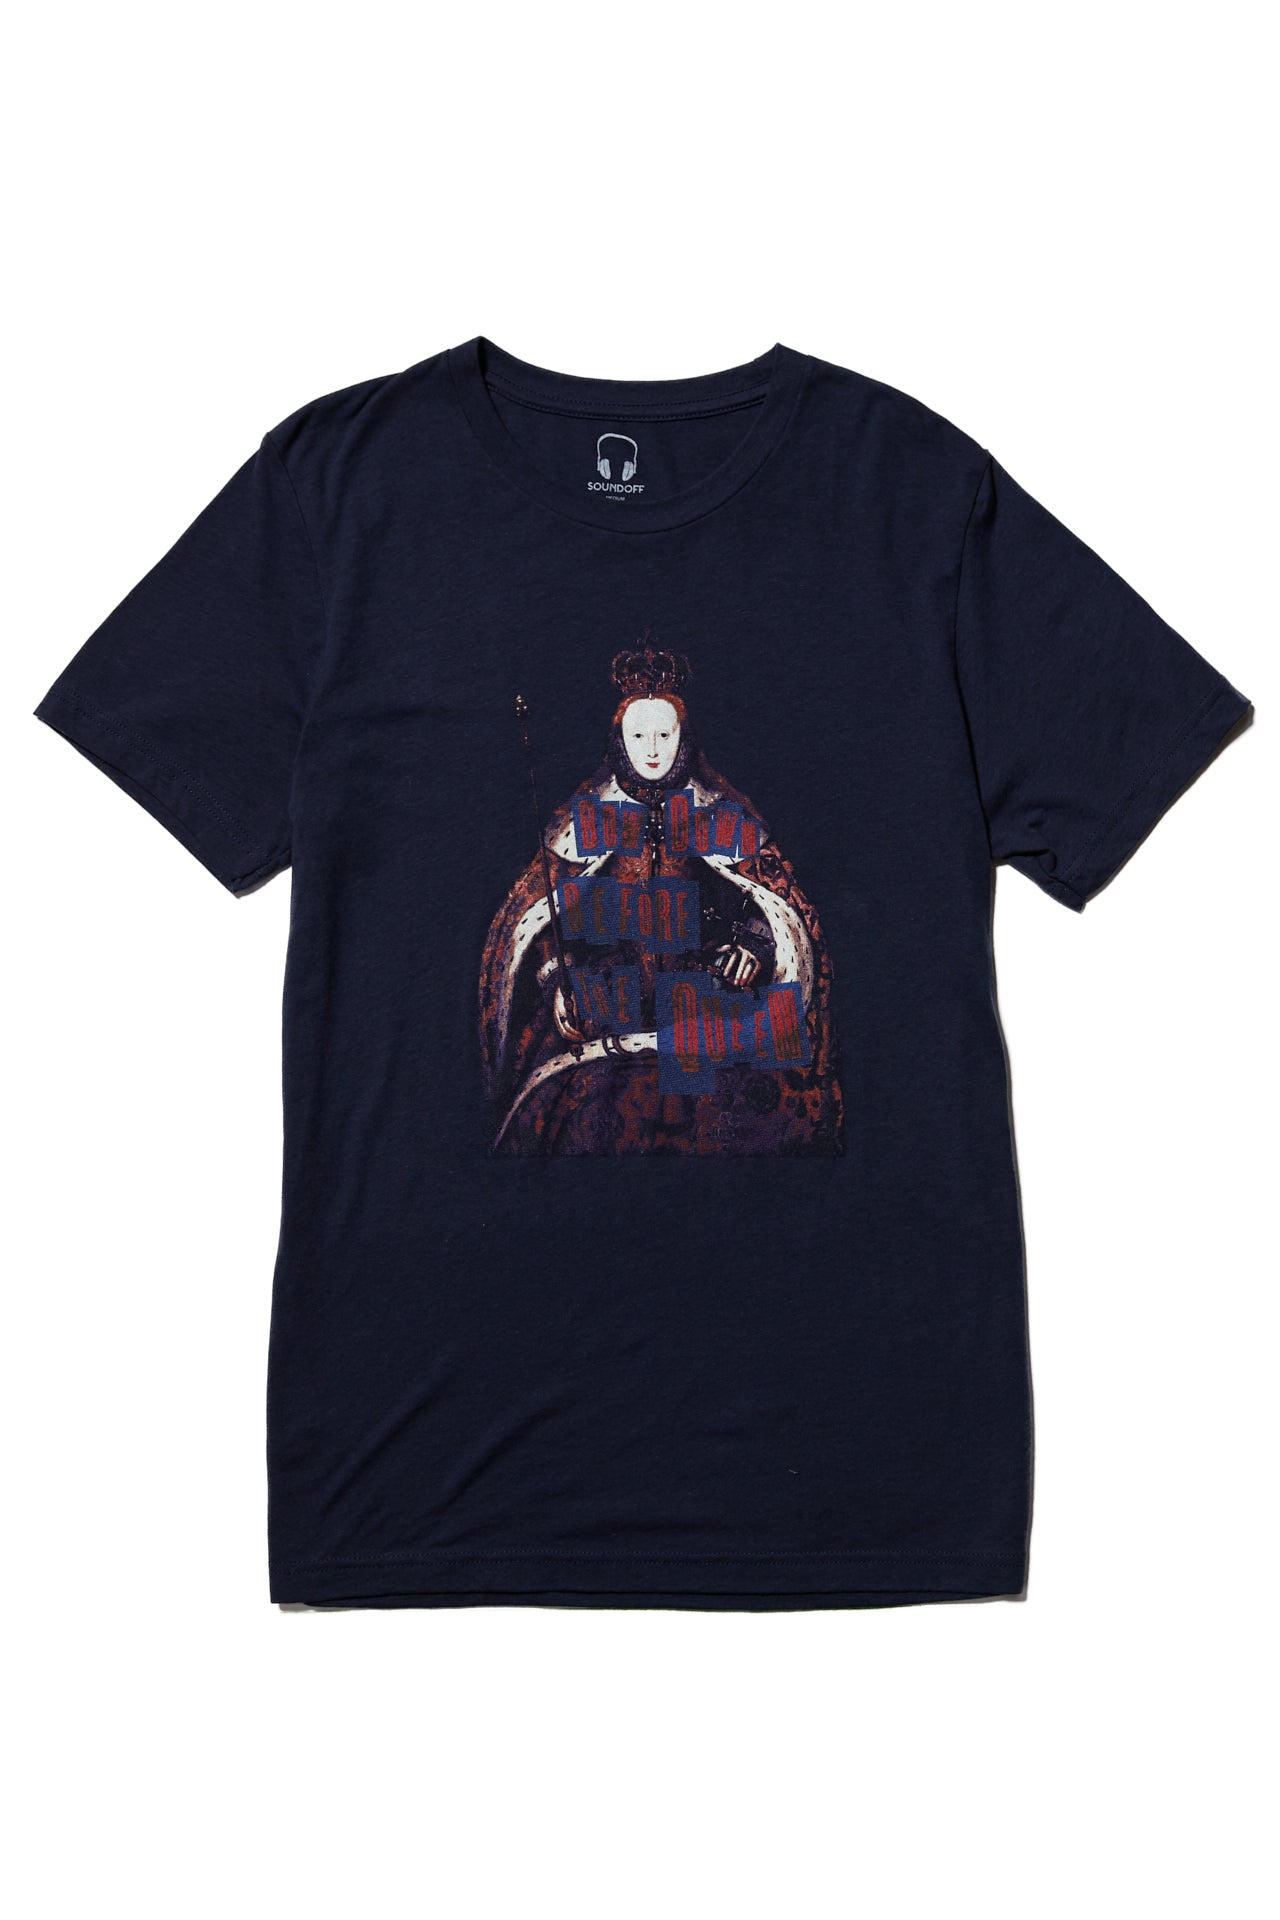 BOW DOWN TO THE QUEEN T-SHIRT